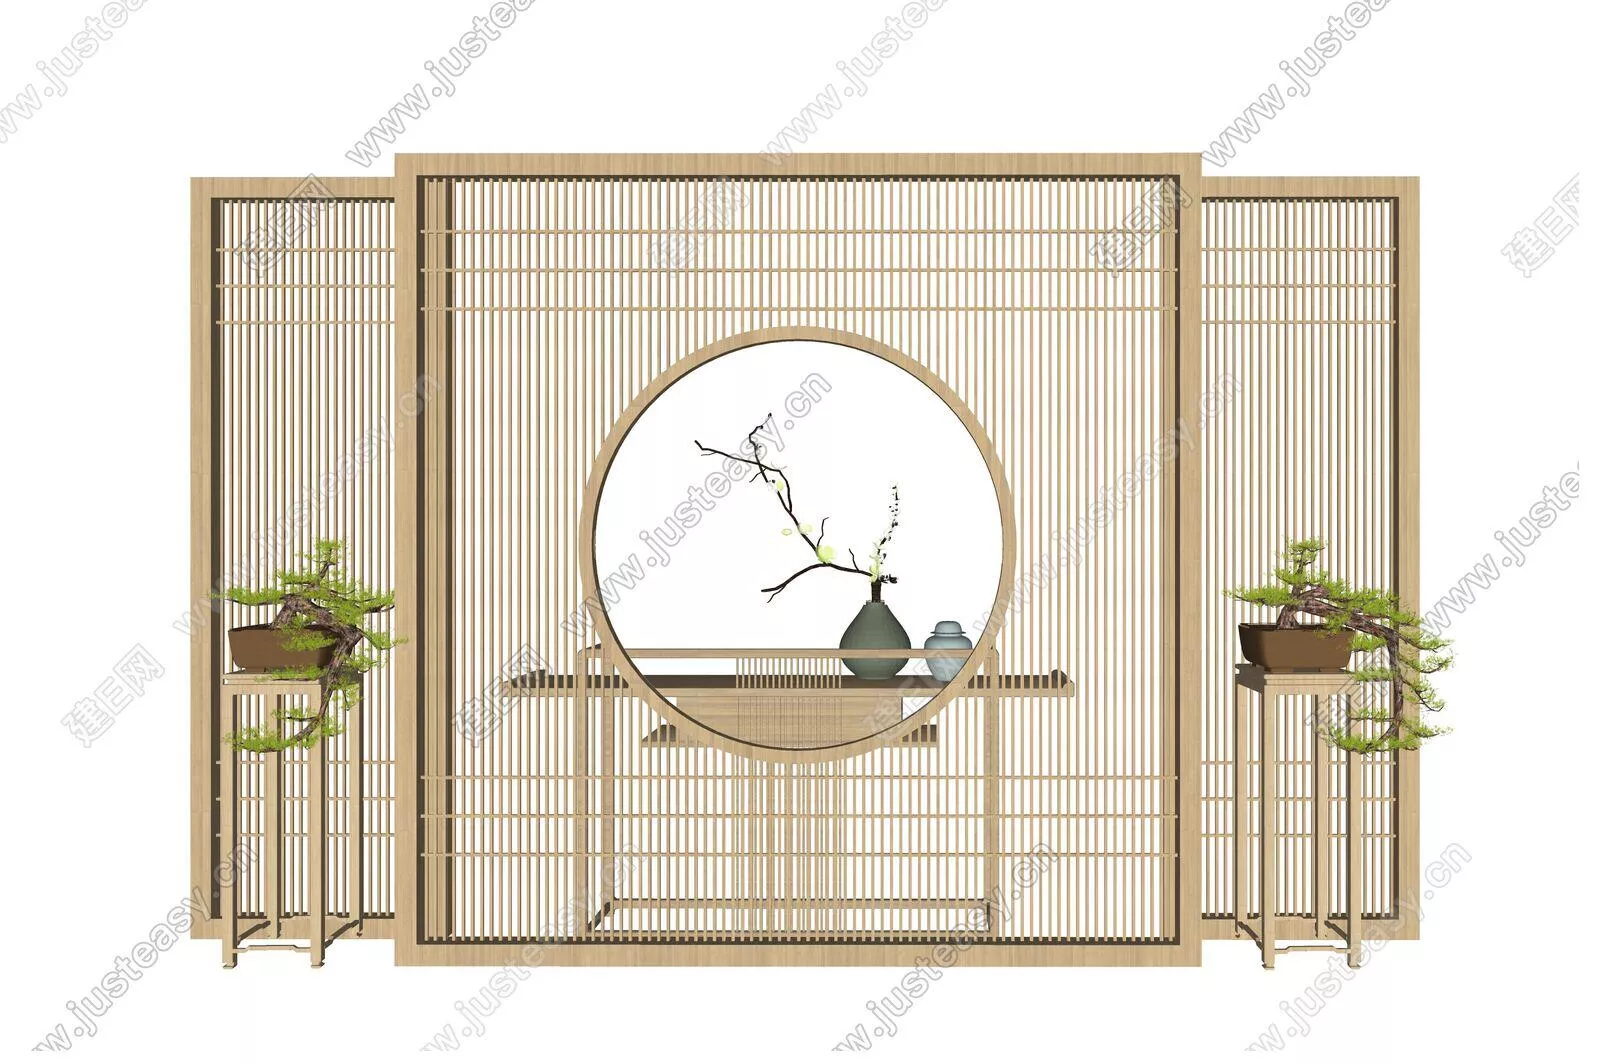 CHINESE PARTITION SCREEN - SKETCHUP 3D MODEL - ENSCAPE - 108937258